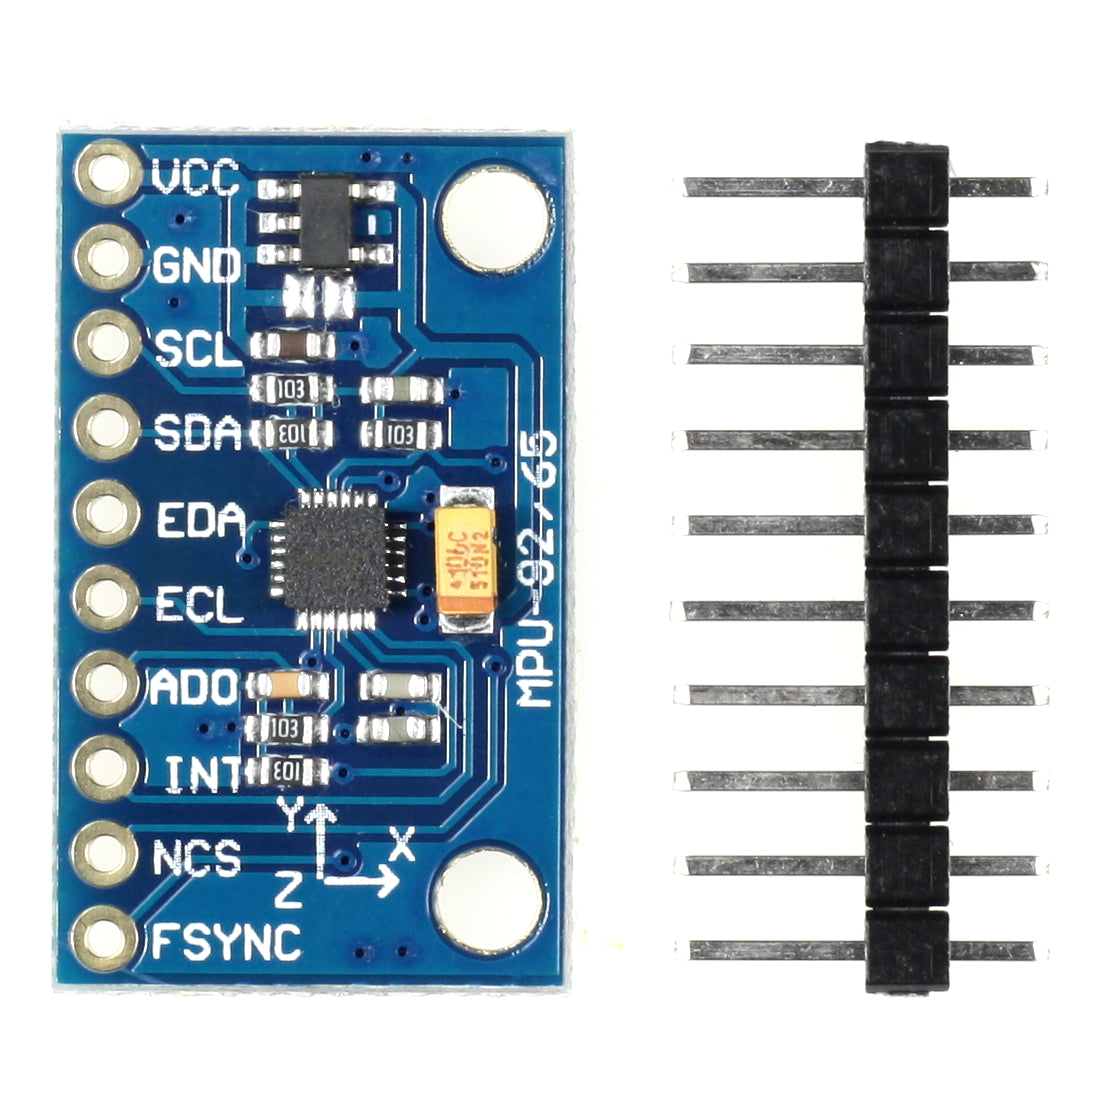 MPU-9250 Module, 3-Axis Accelerometer, 3-Axis Gyroscope and 3-Axis Magnetometer, 9DOF, I2C, SPI